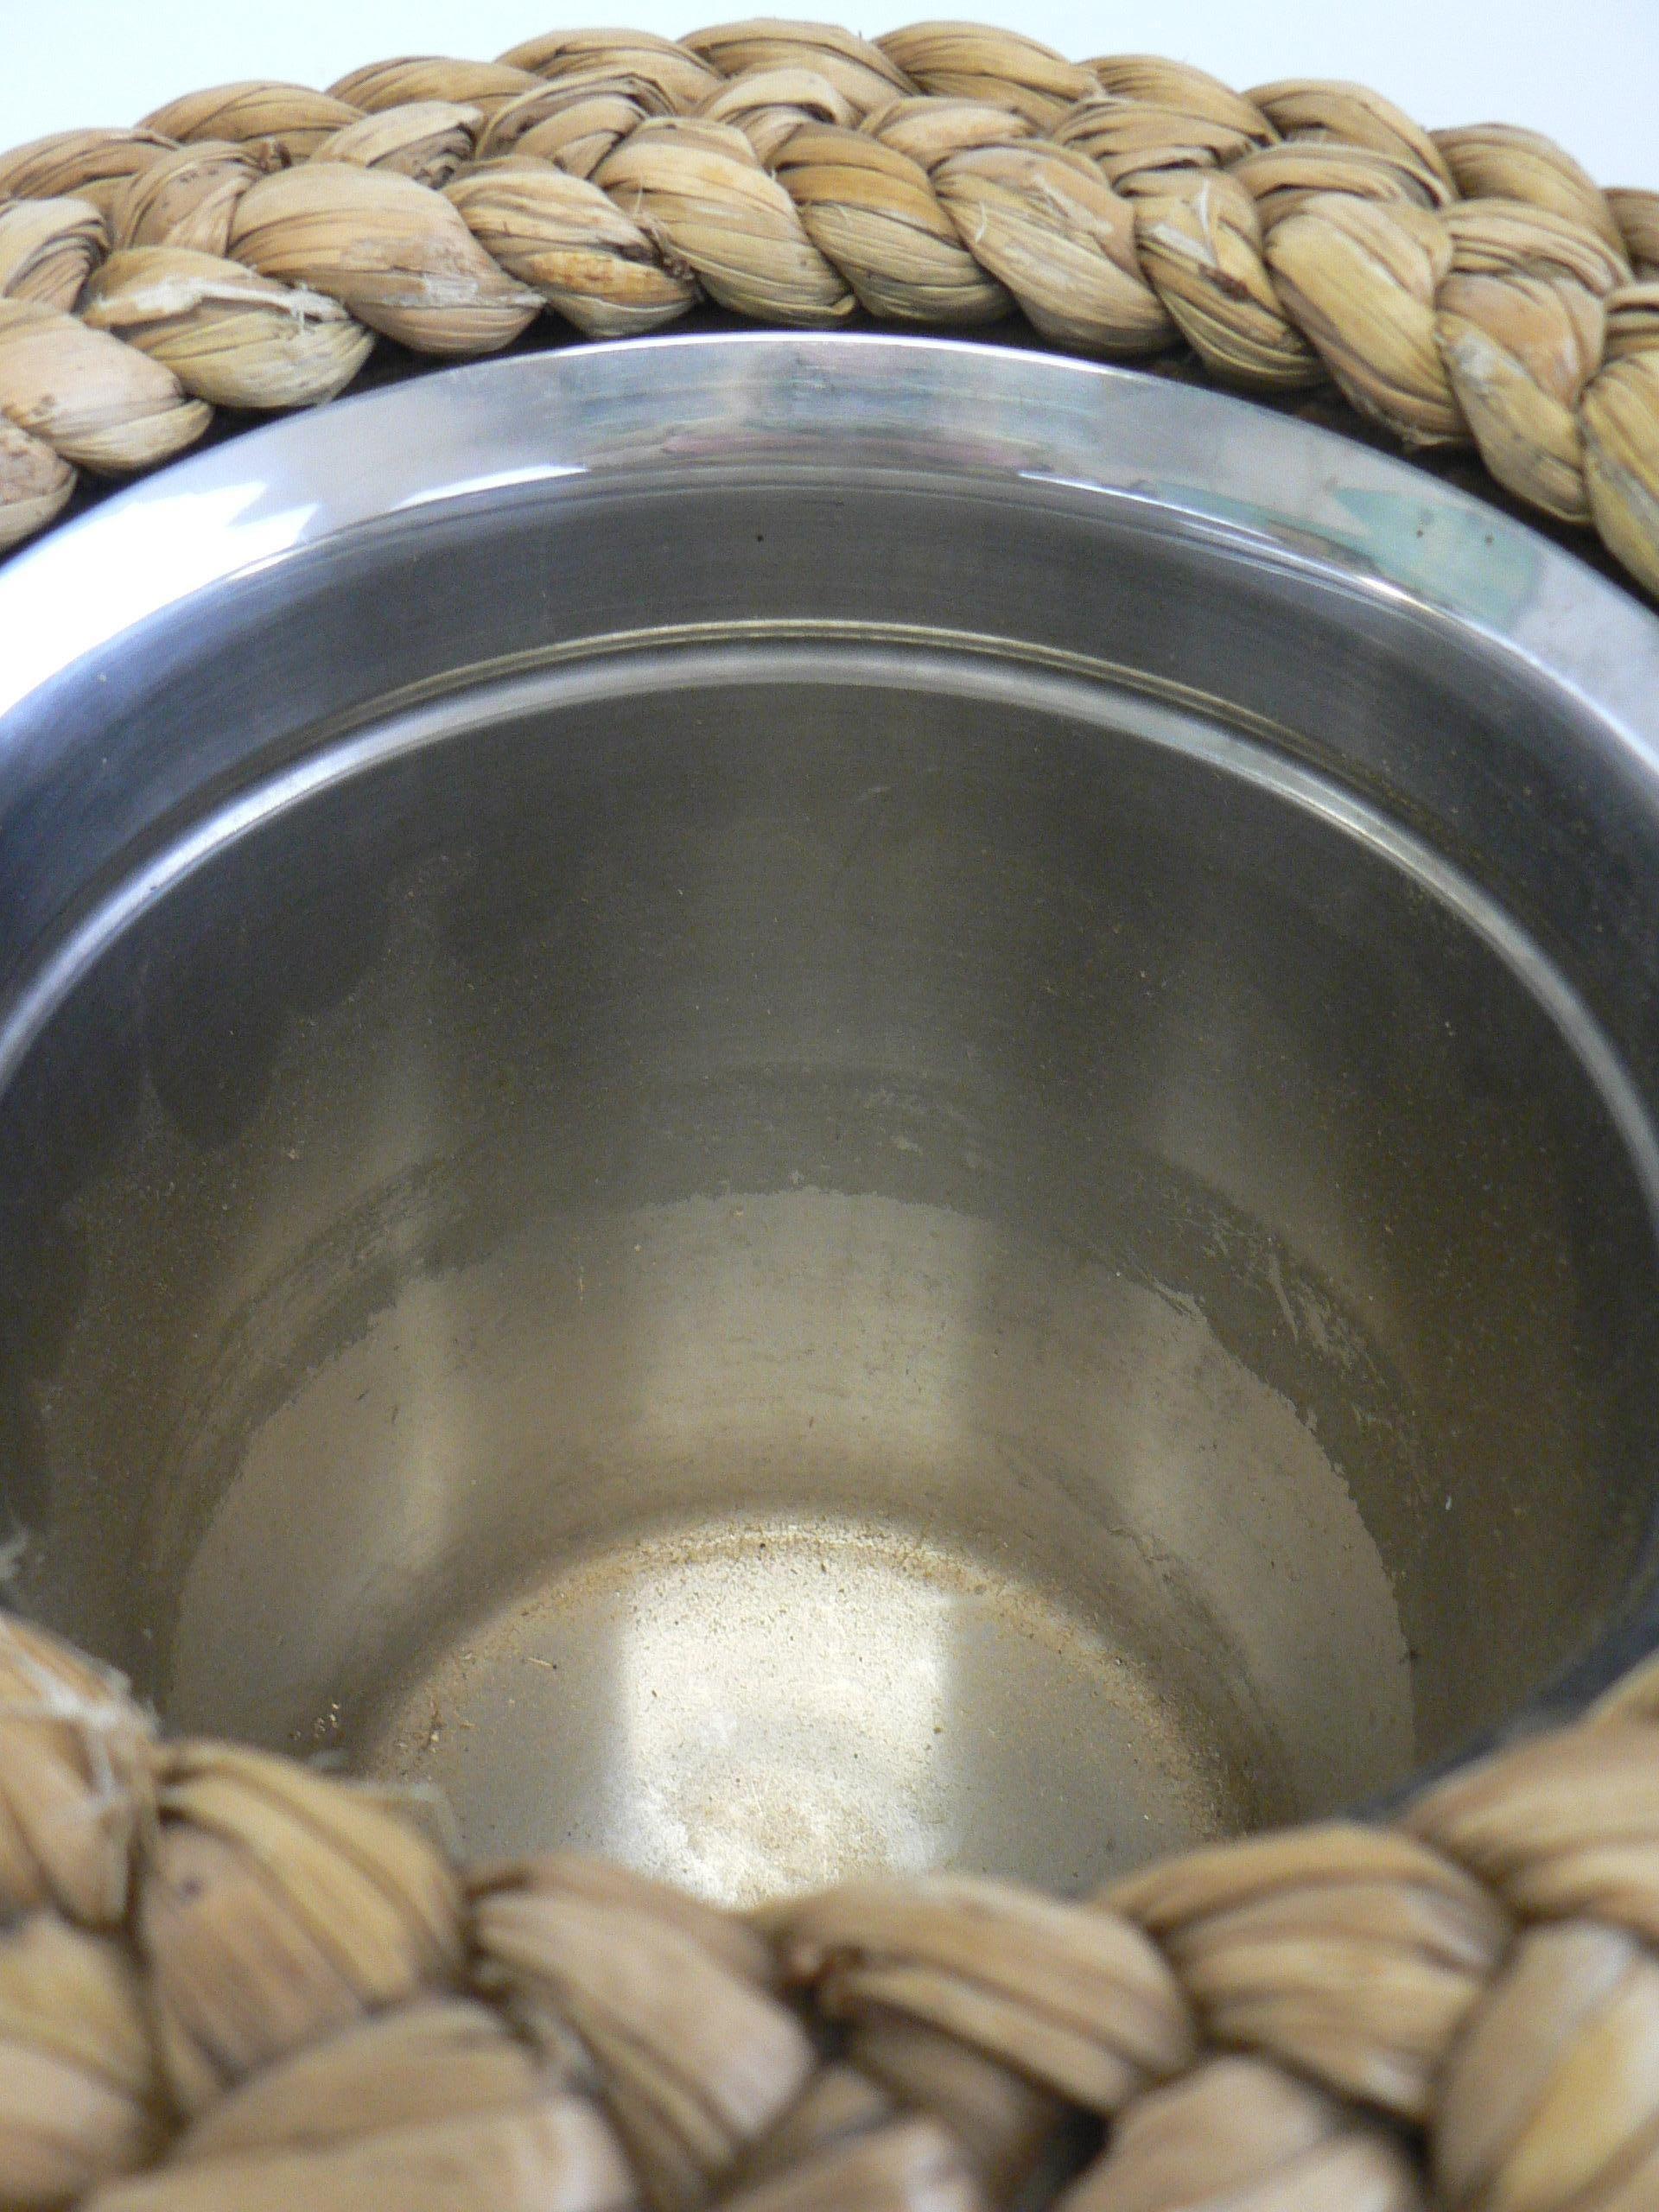 Stainless Steel Champagne Bucket with Sisal Woven Exterior by Audoux and Minet France 1950 For Sale